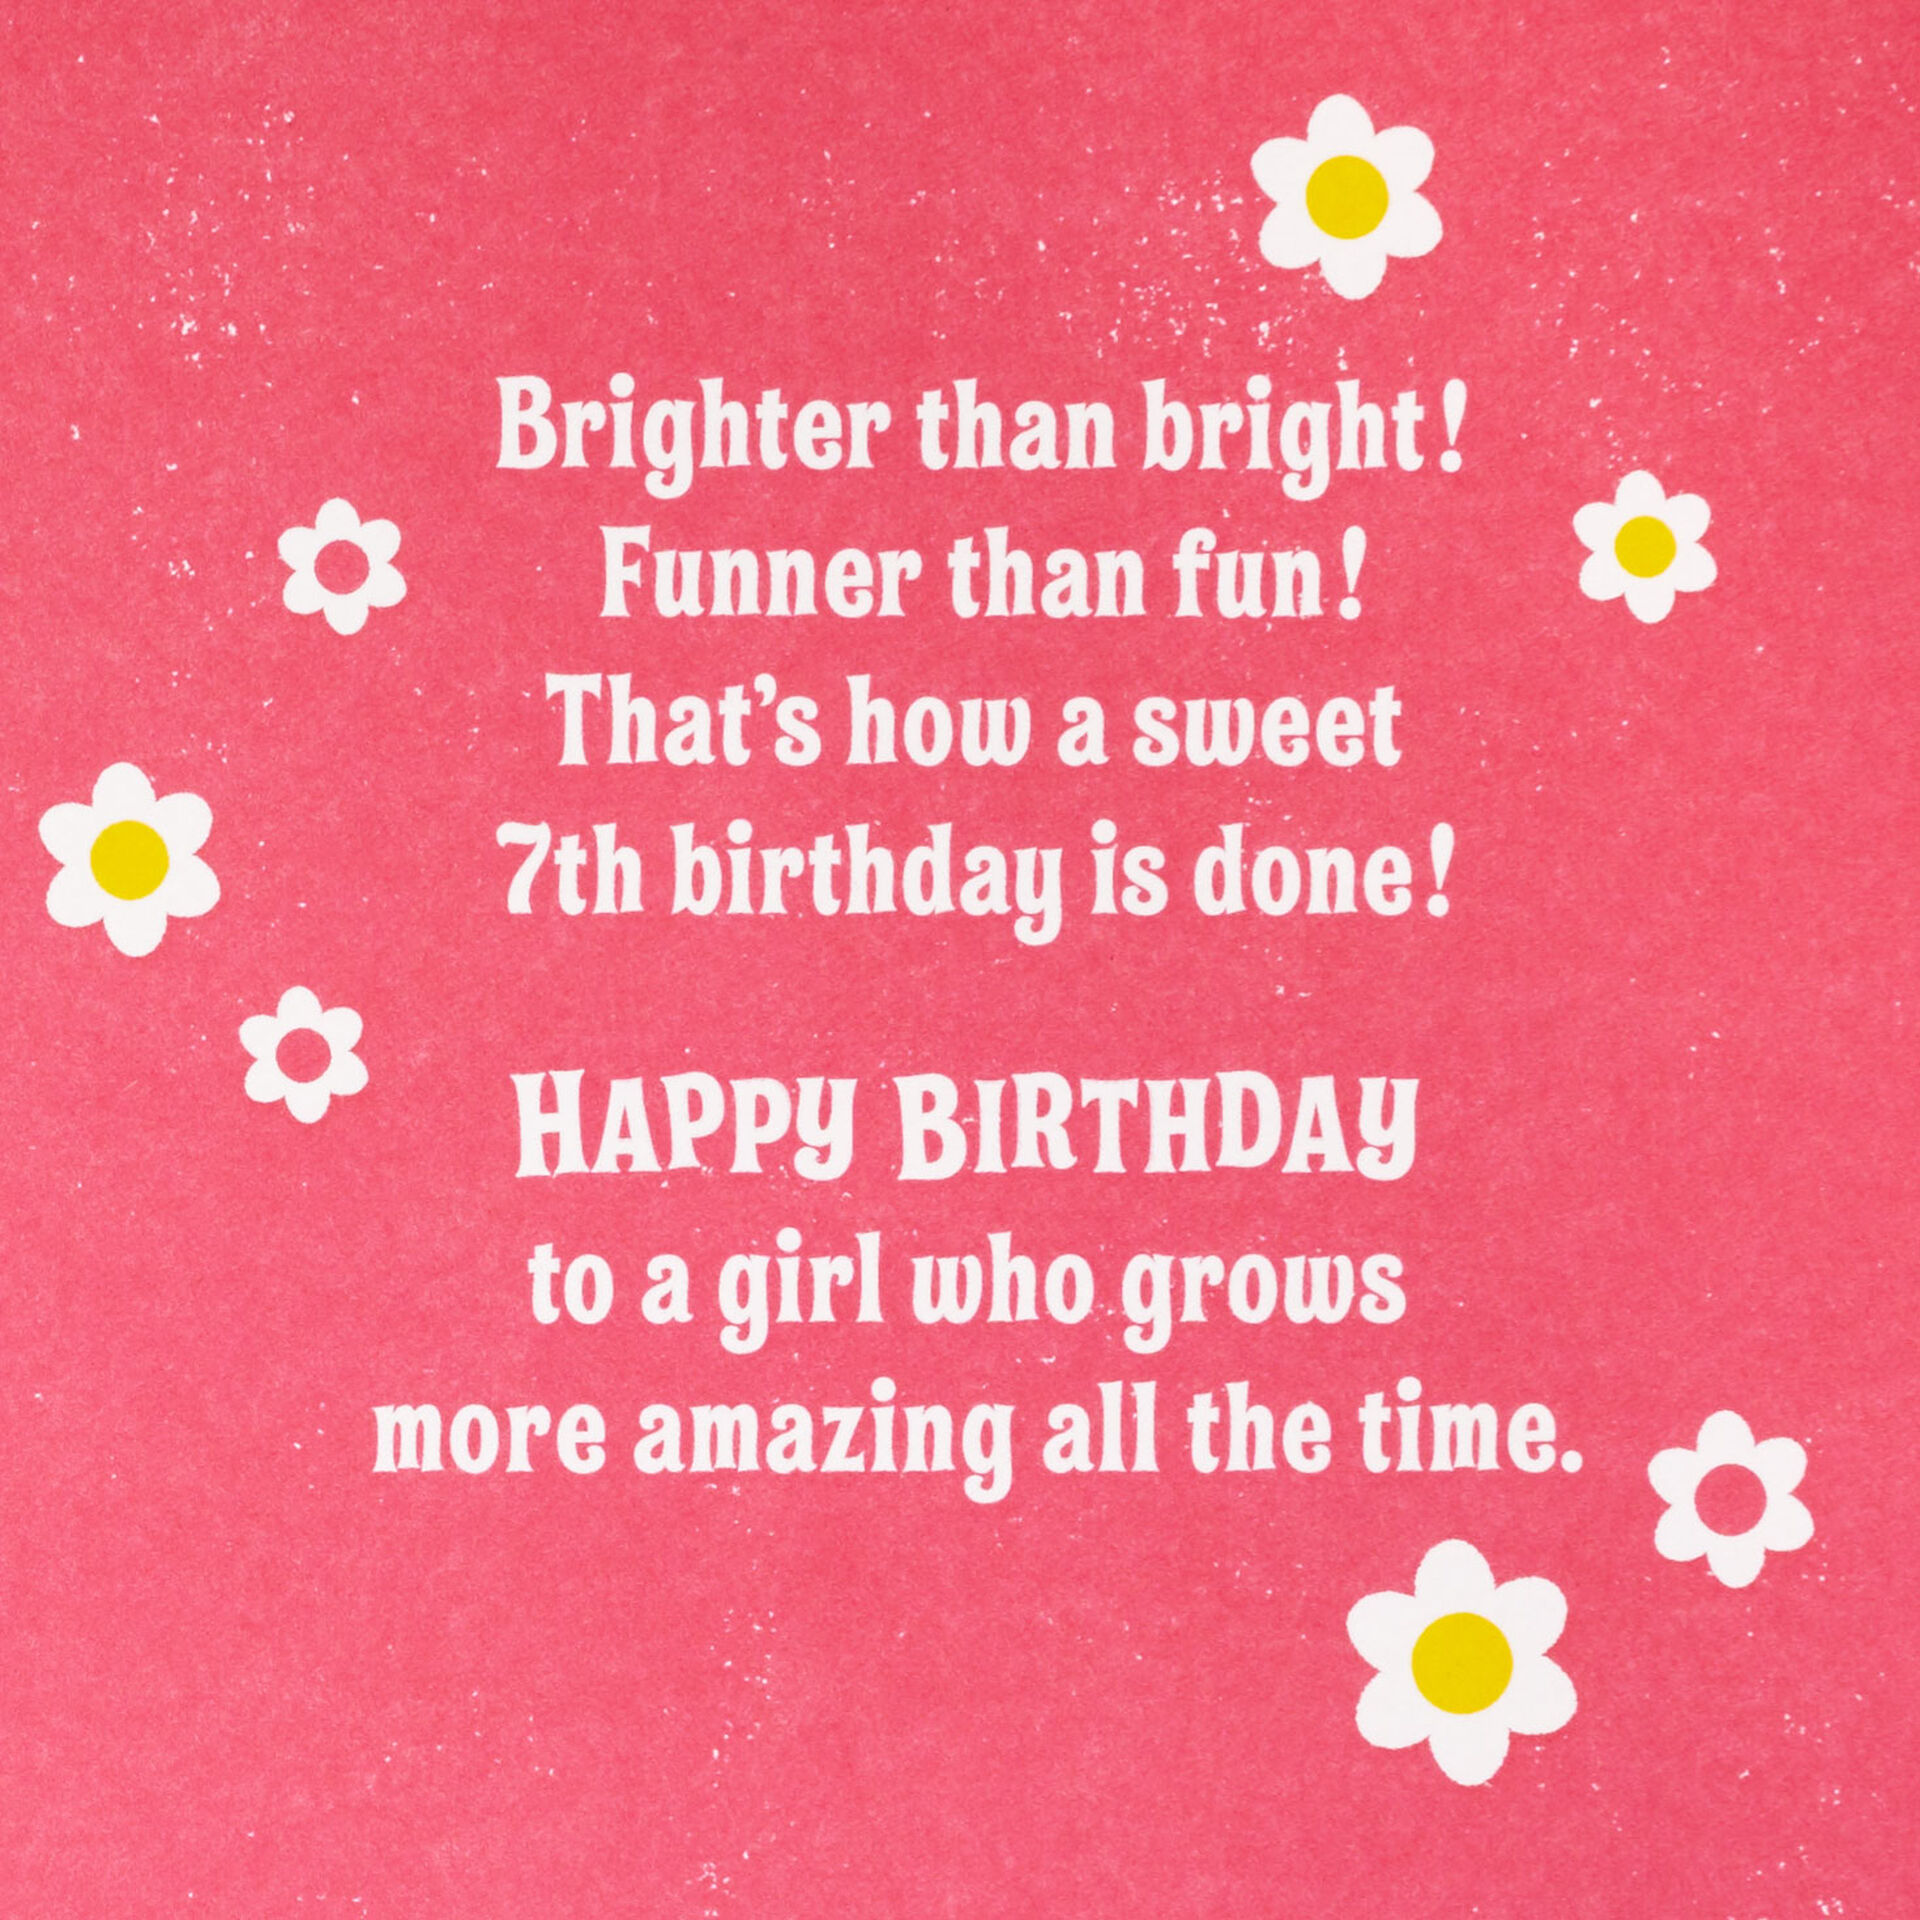 Flowers-and-Hearts-Confetti-7th-Birthday-Card-for-Her_499HKB5645_02